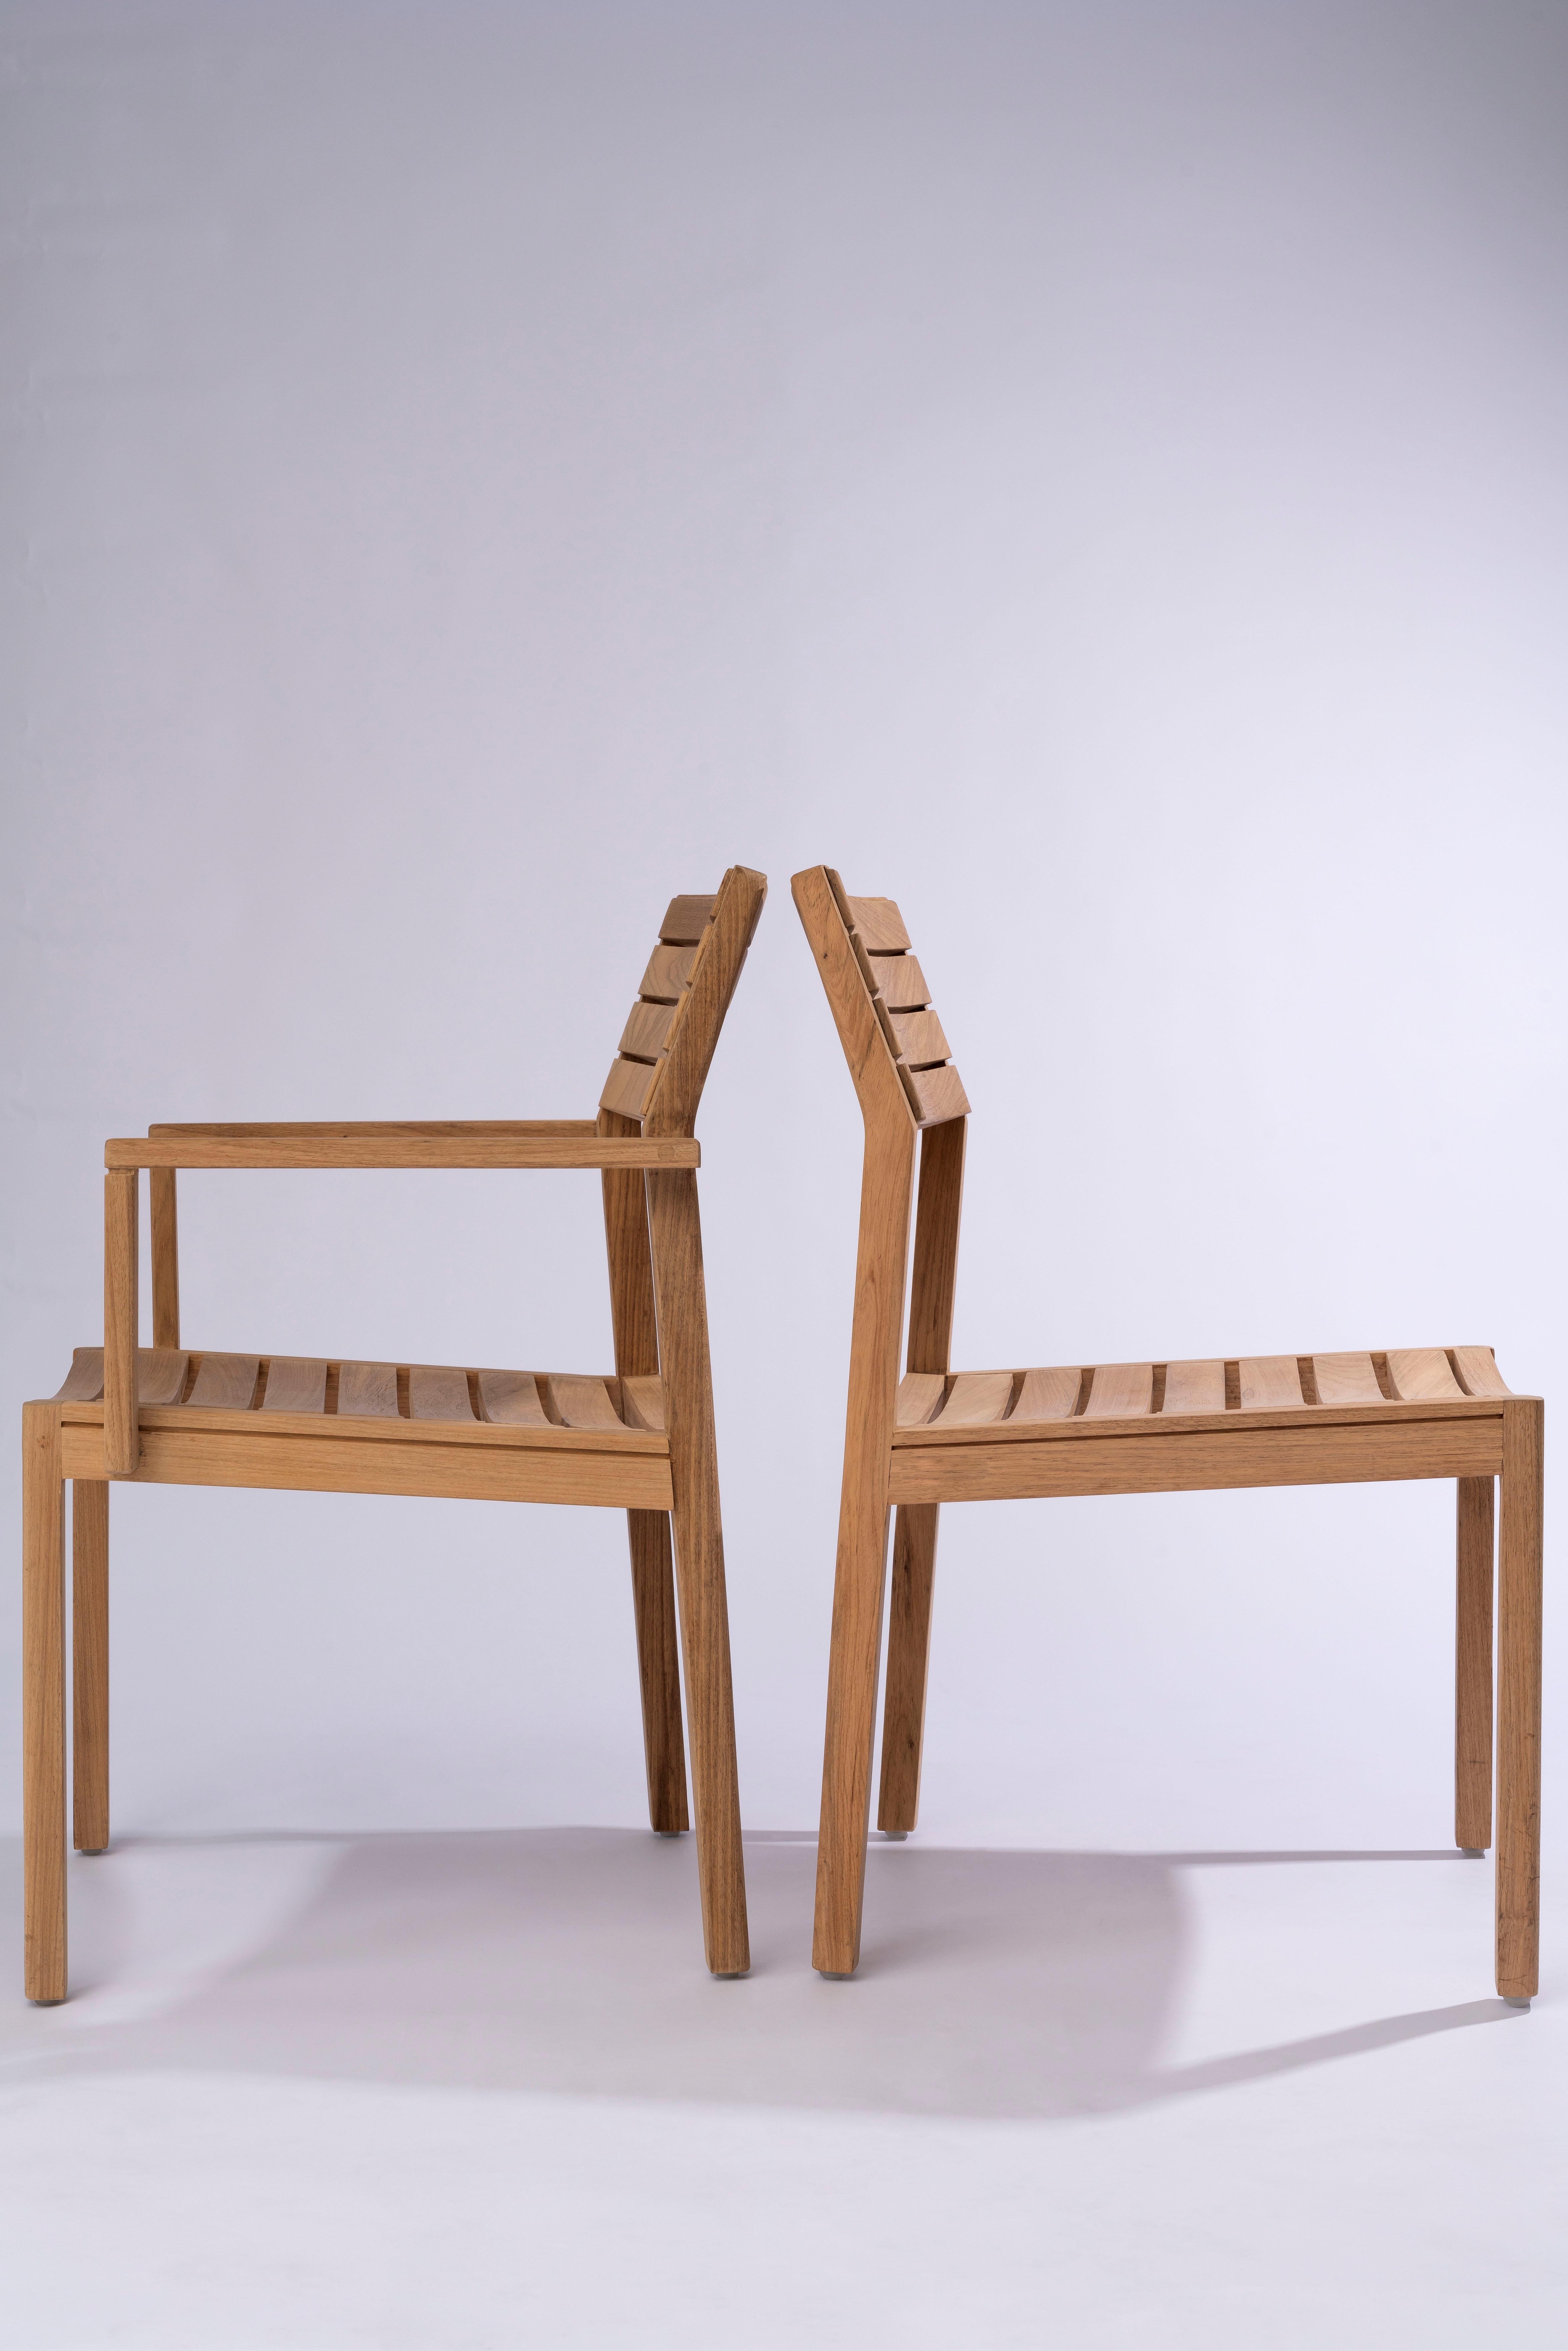 Textile Solid Wood Arms Chair with Wooden Slats, for the Outside, Outdoor Resistant For Sale